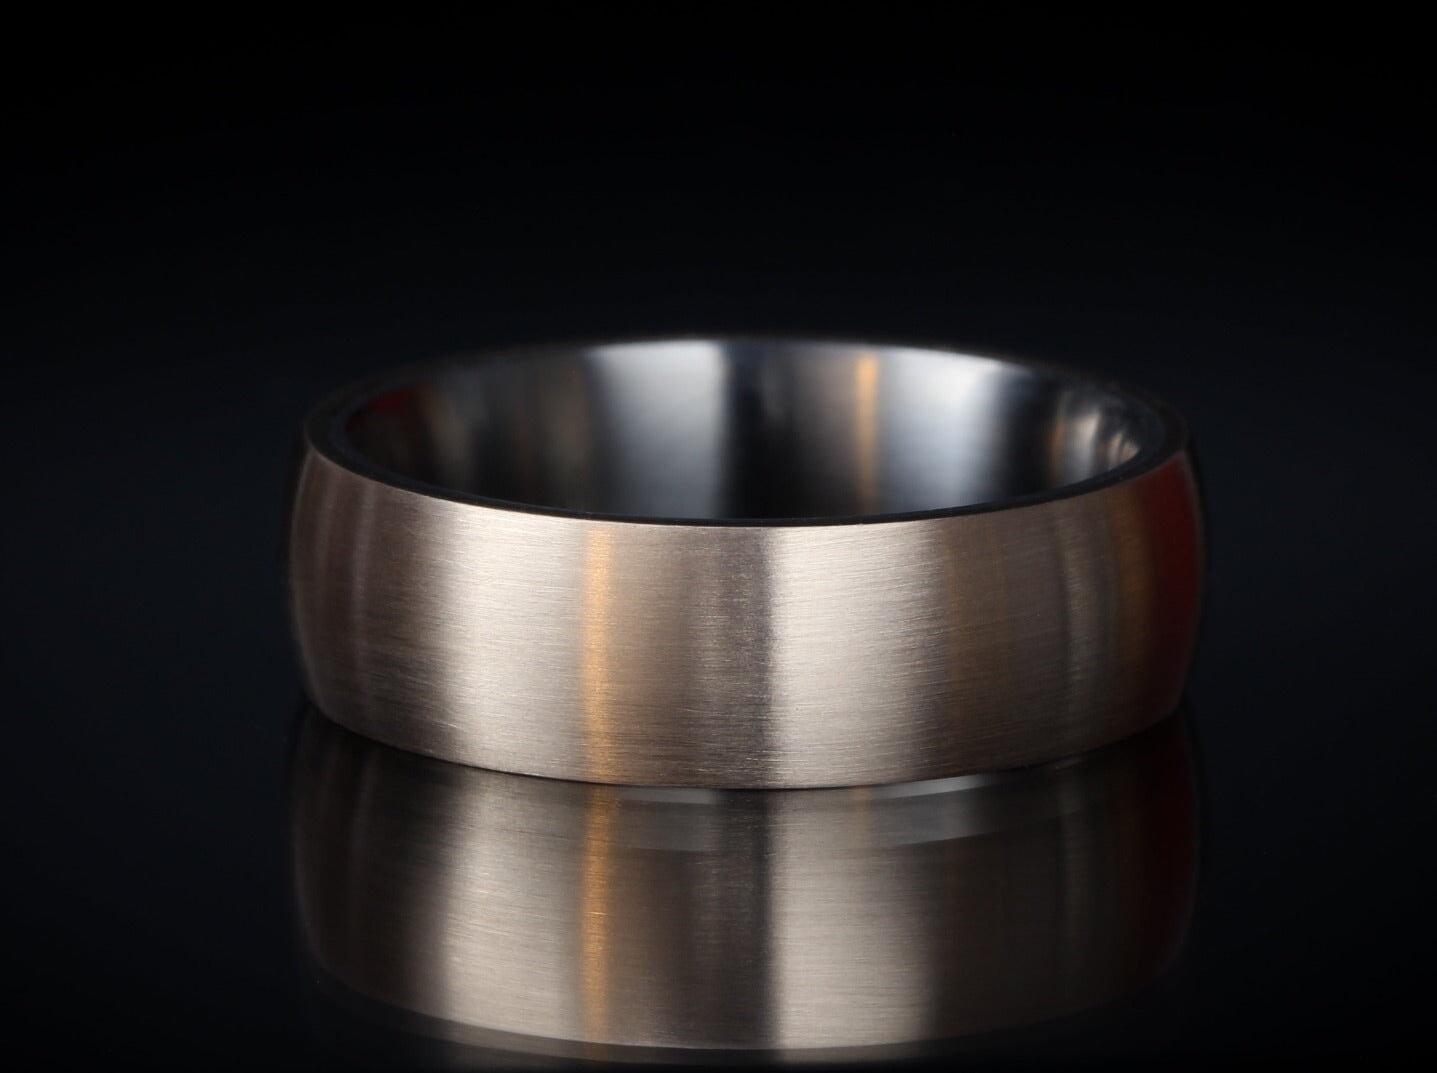 Brushed "Wilde" titanium ring on a reflective surface